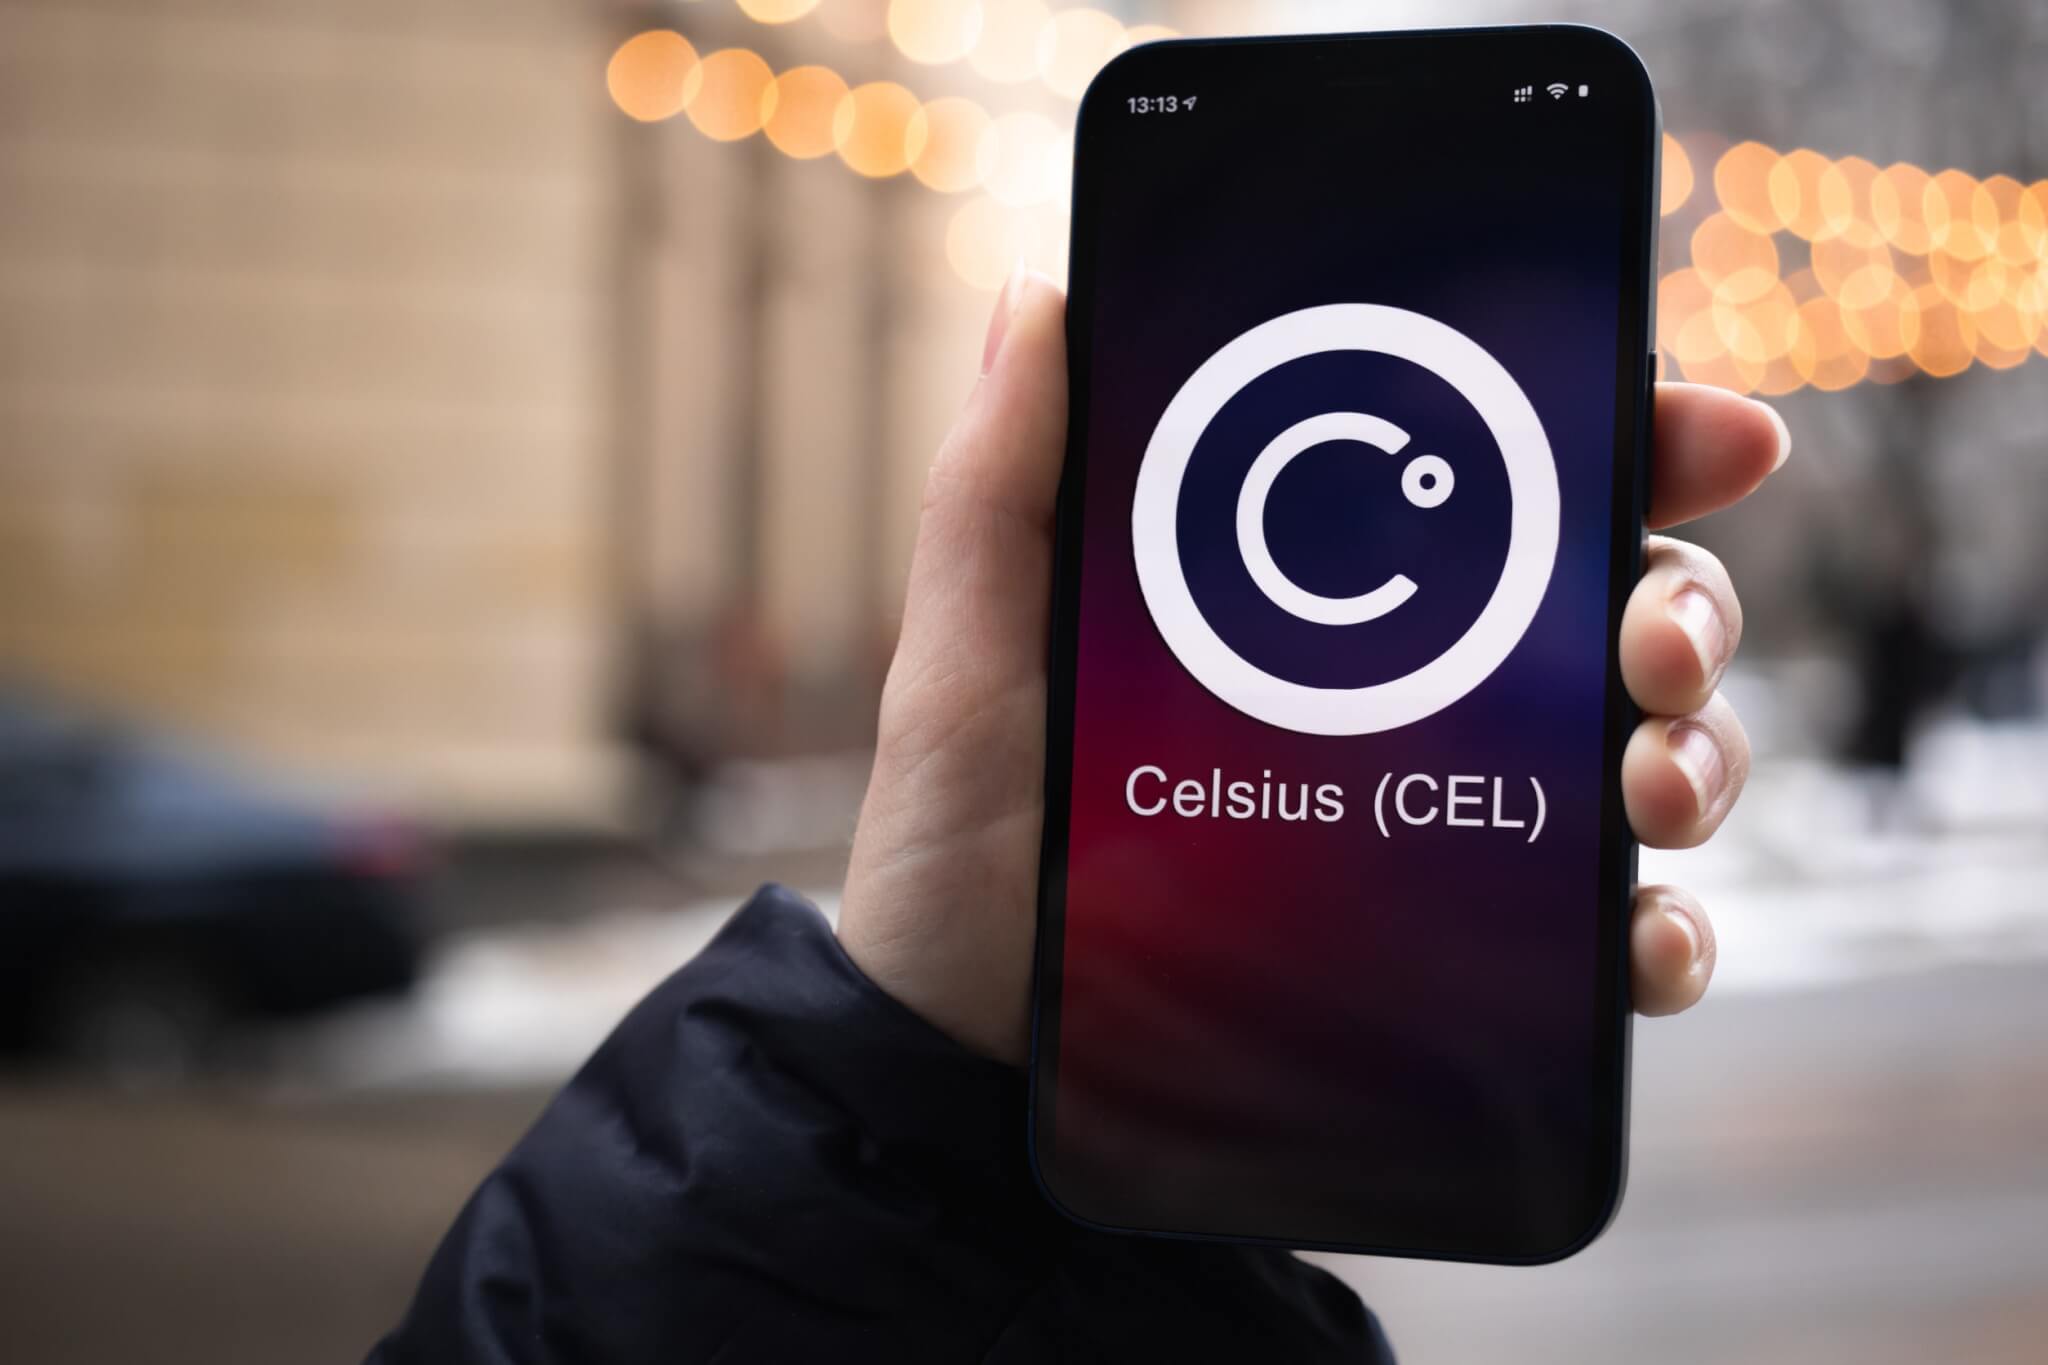 us bitcoin corp deal with celsius network  US Bitcoin Corp announces a deal with Celsius Network 181633267 m normal none min